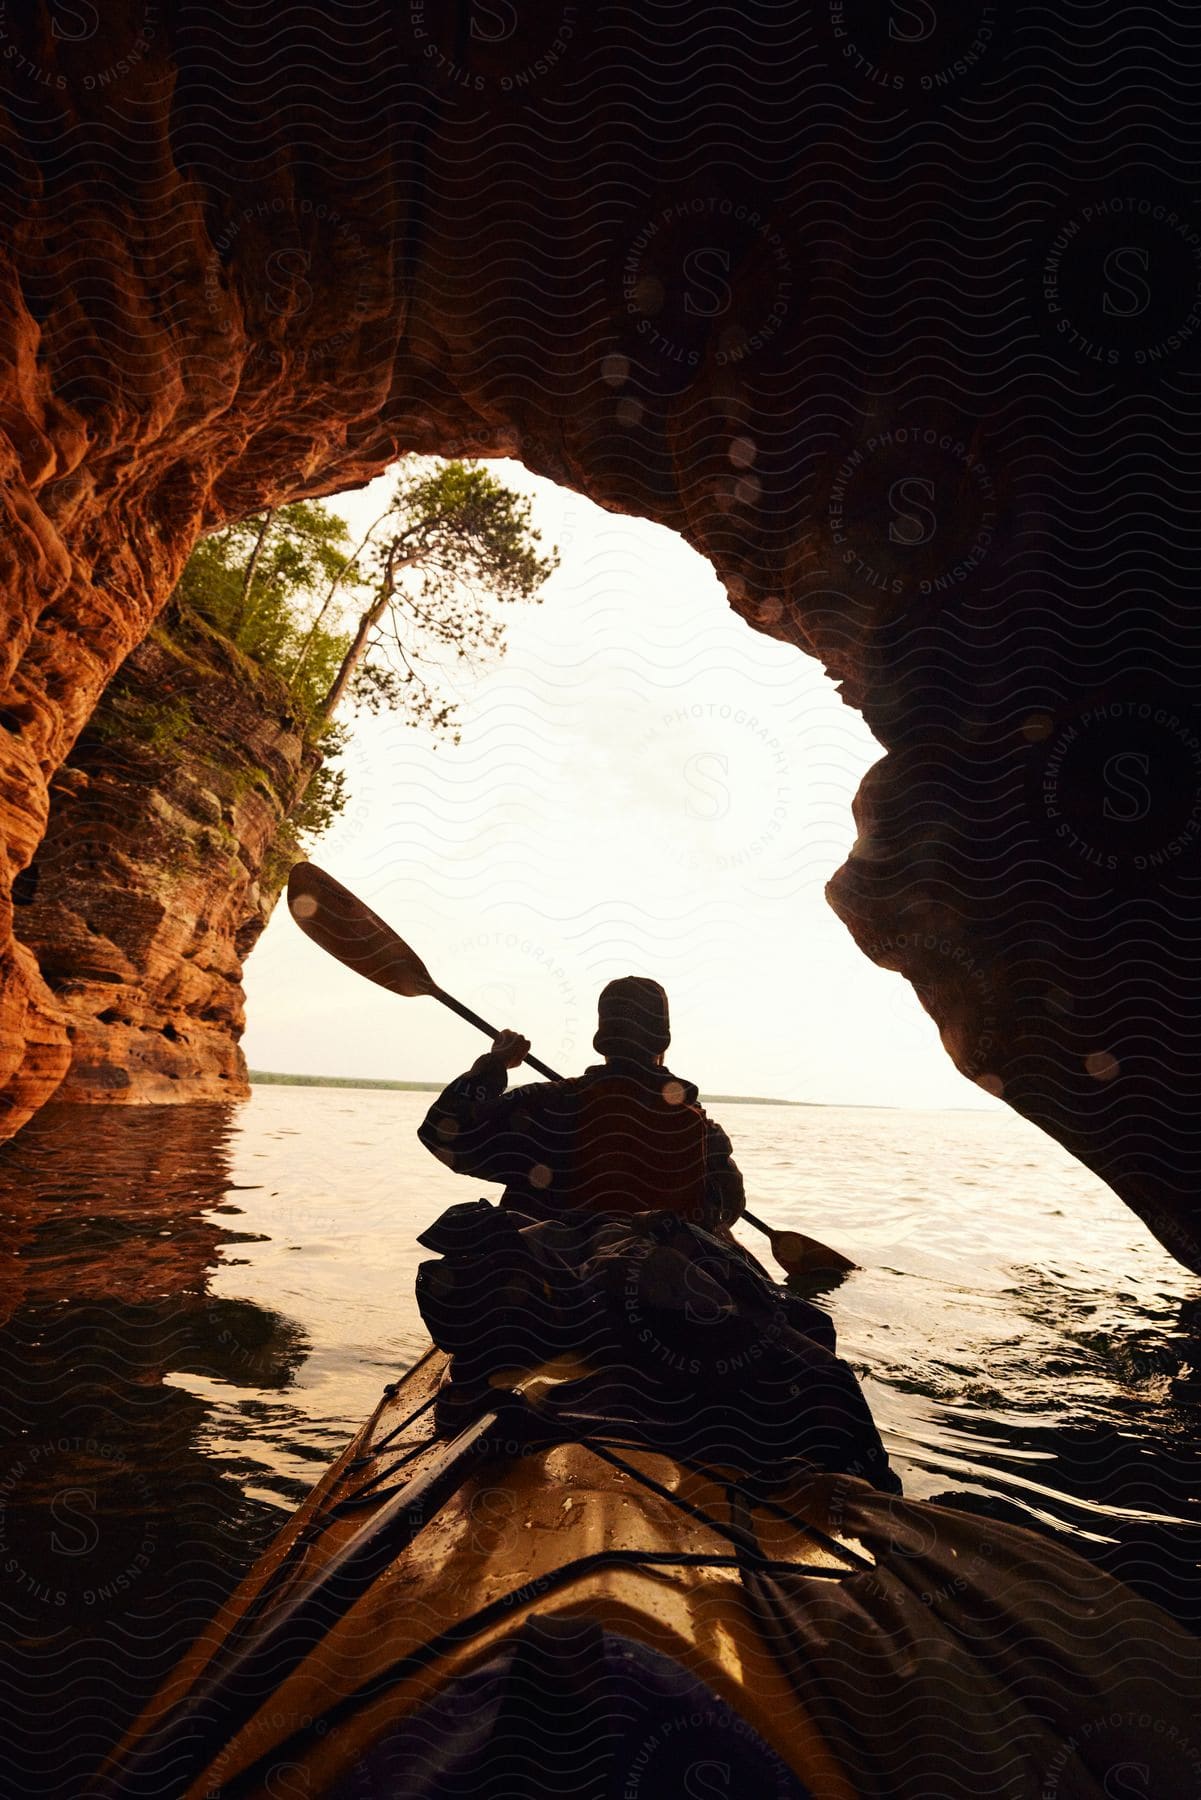 a person riding a canoe out from a cave